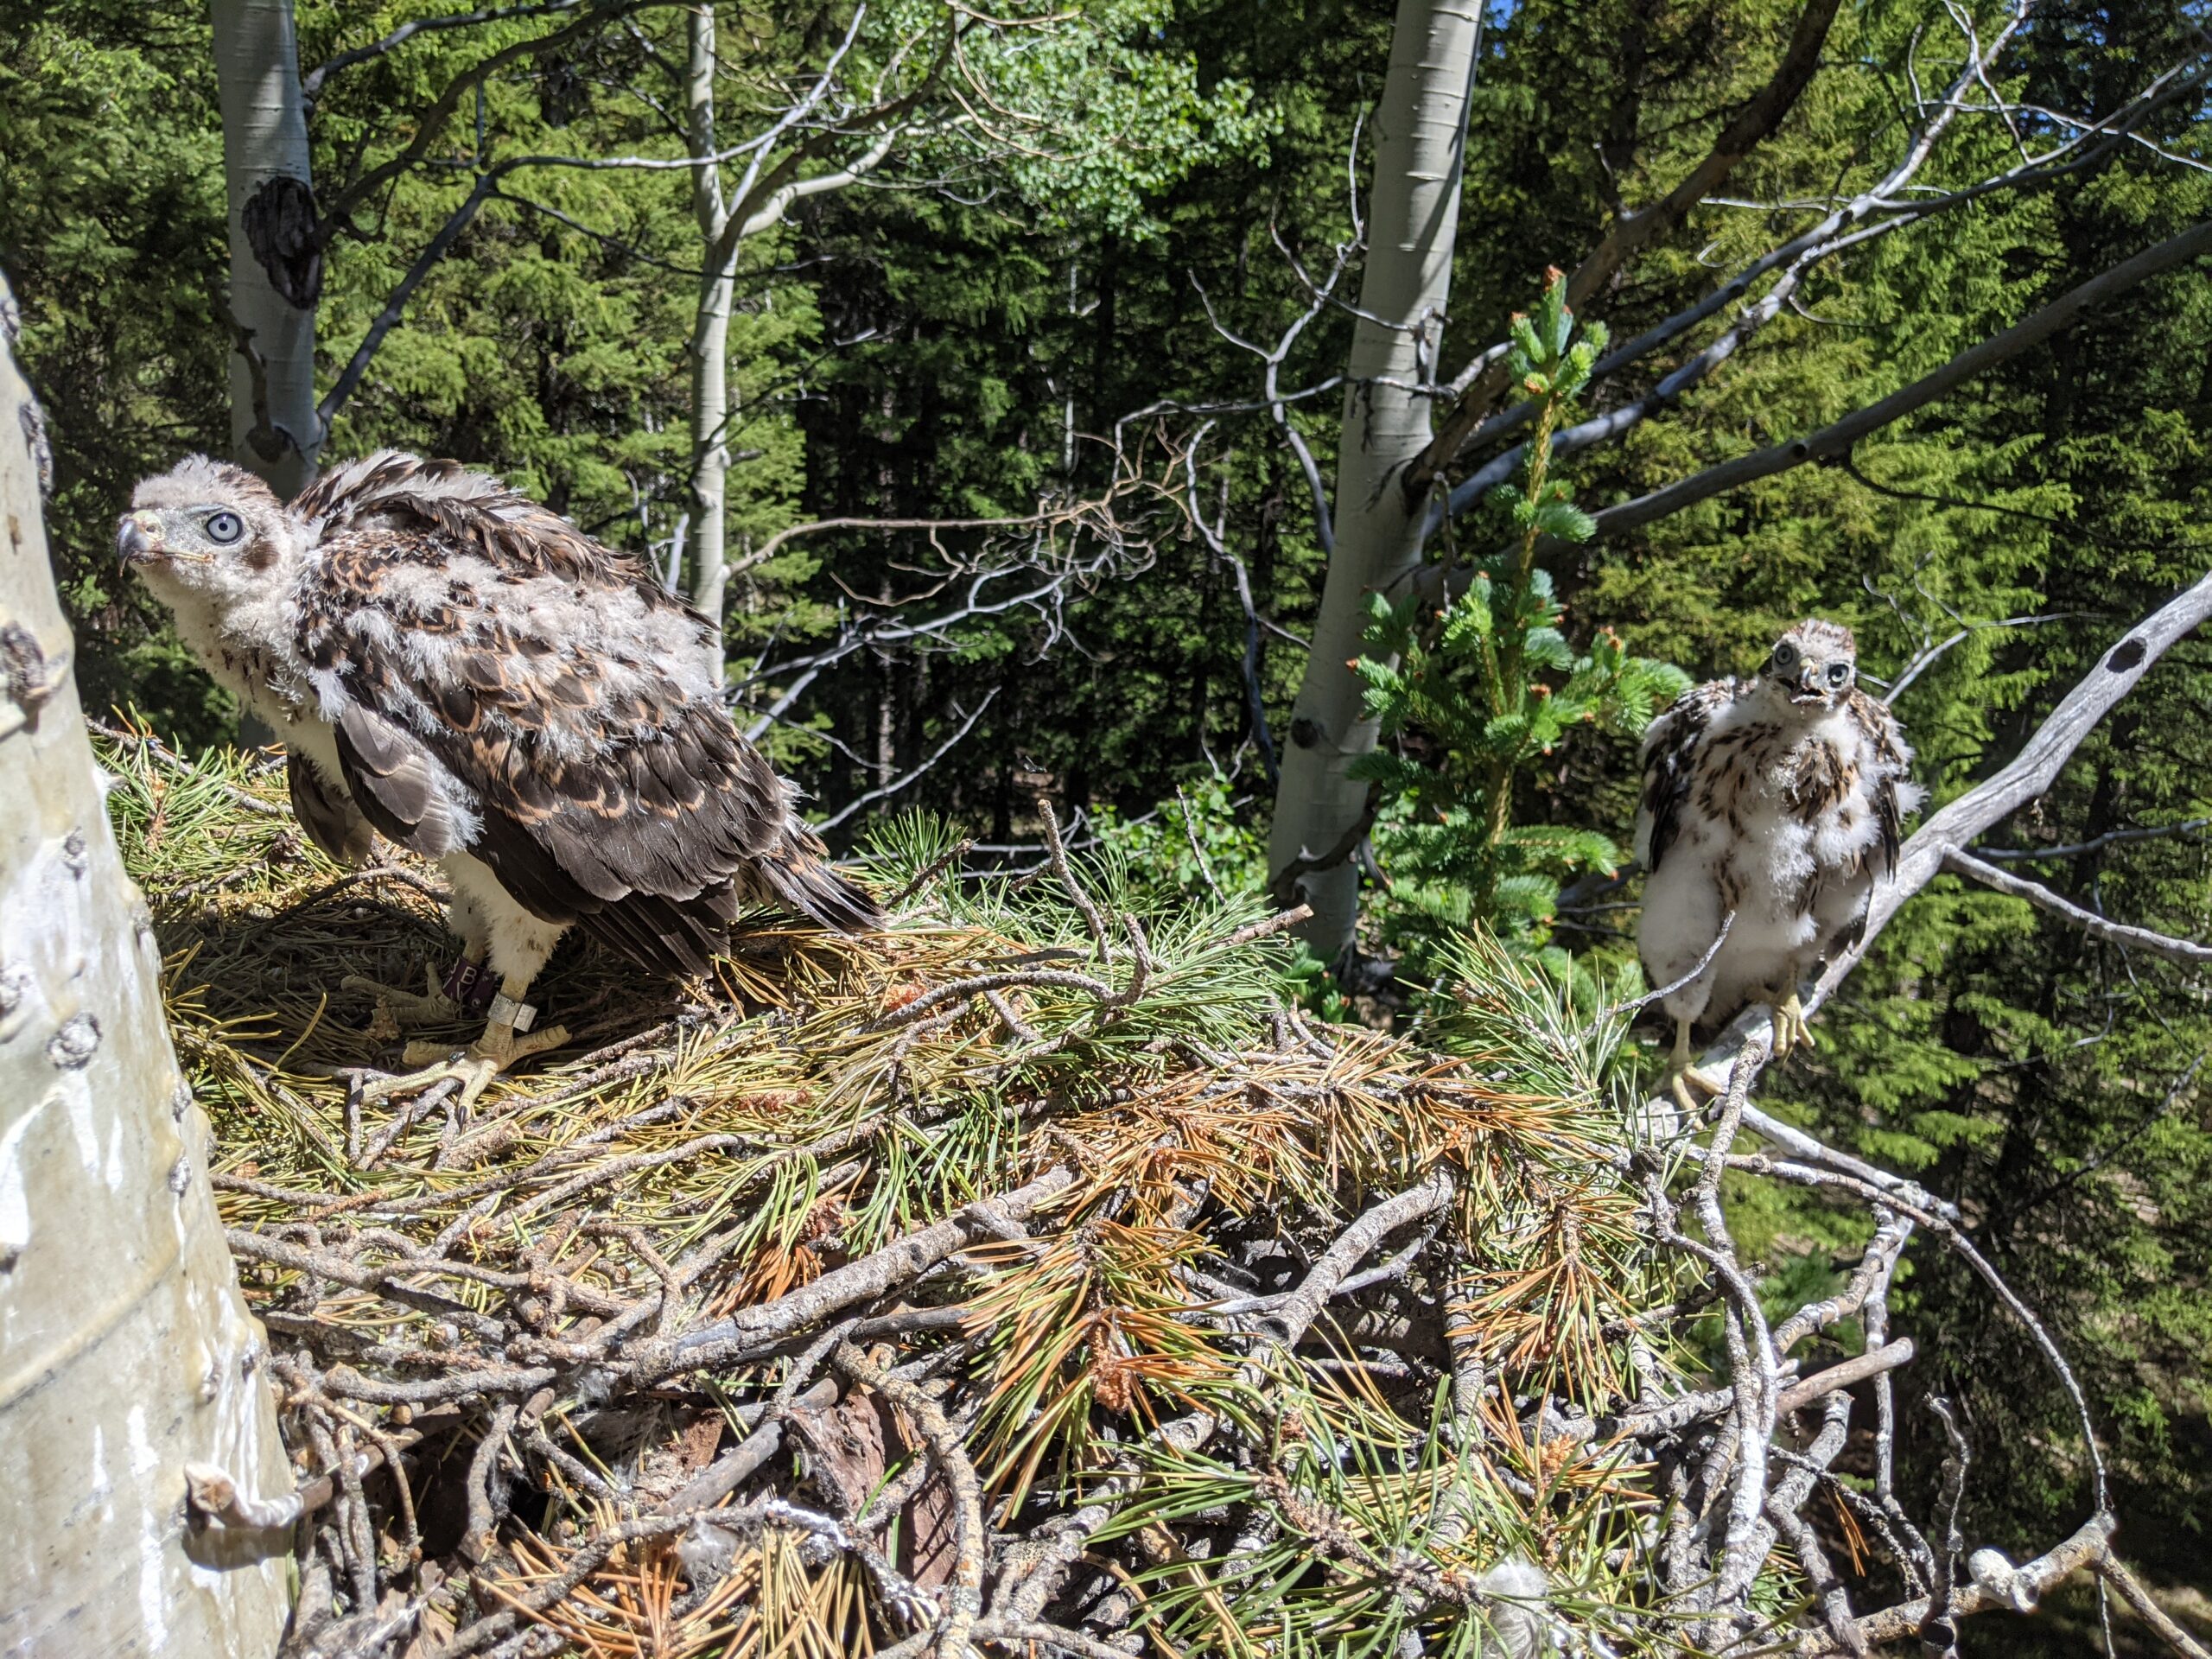 a messy nest of twigs and conifer needles host two awkward young hawks. They have a disheveled mix of baby down and new brown feathers growing in. One is perched on a thin branch hanging out over the edge of the nest. Both look toward the camera with grumpy expressions. The background is a full canopy of conifer trees with a few aspen trunks